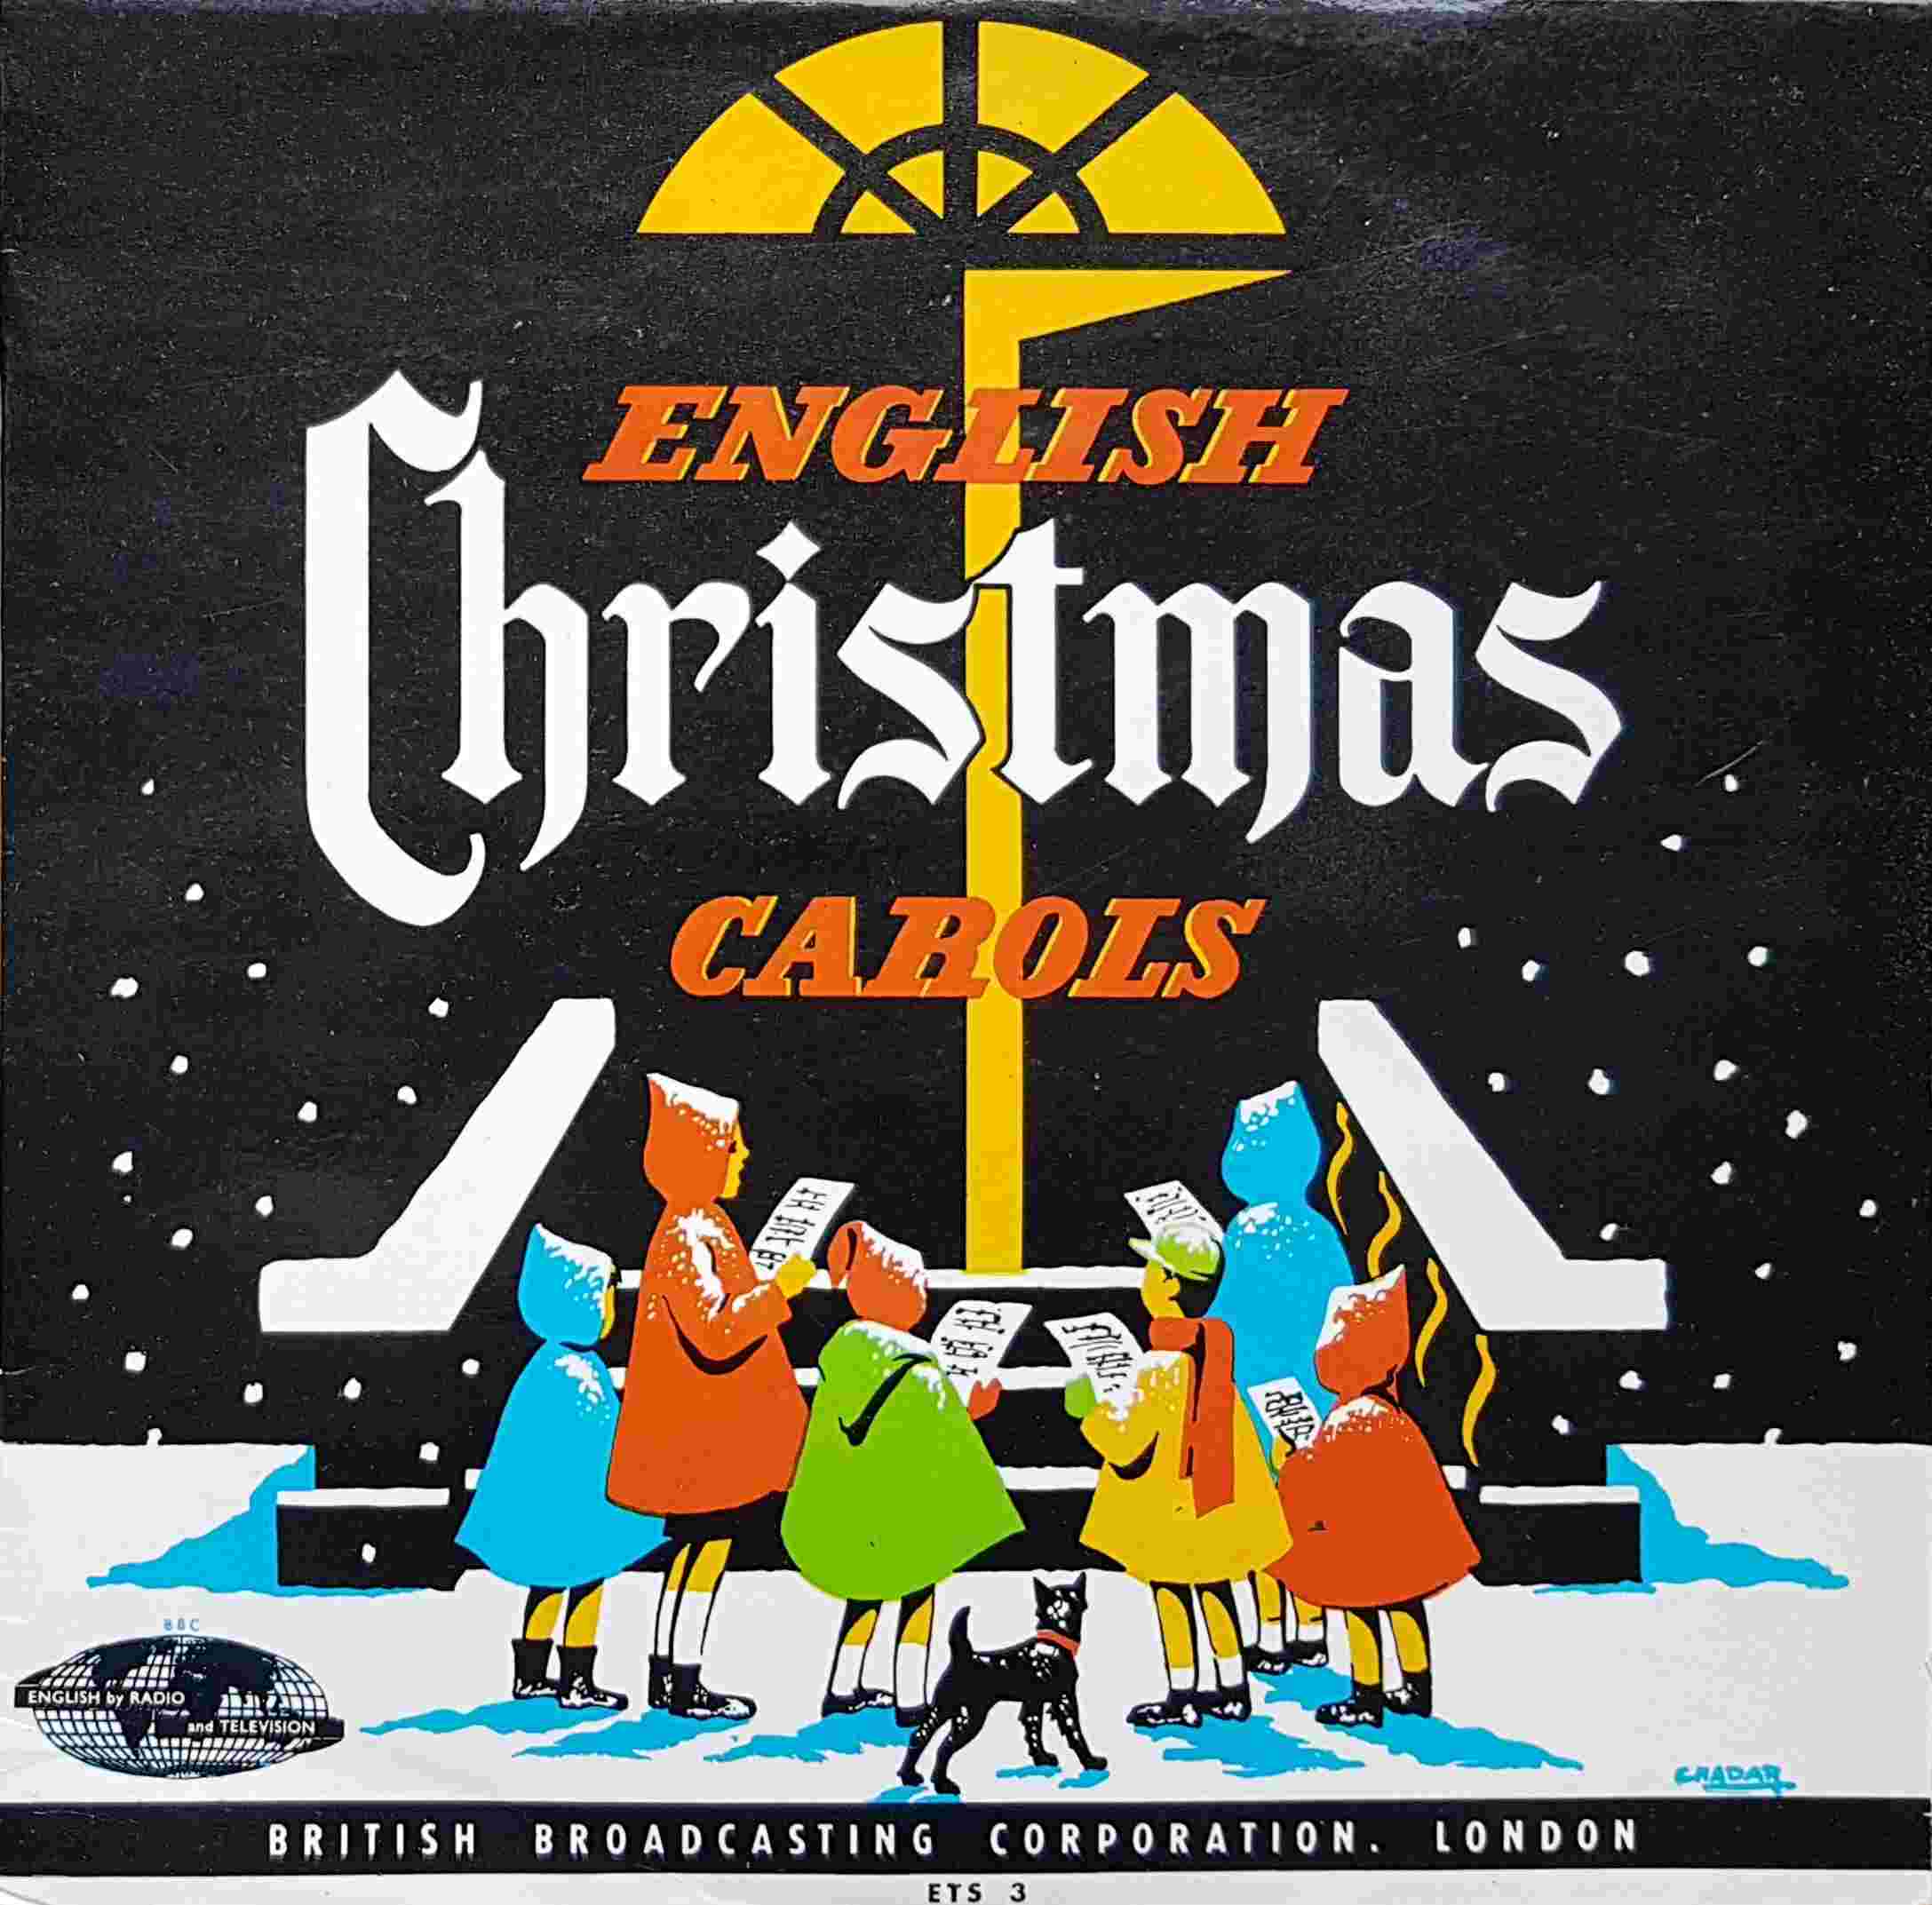 Picture of ETS 3 Christmas carols - French import by artist Choir of King's College, Cambridge from the BBC 10inches - Records and Tapes library